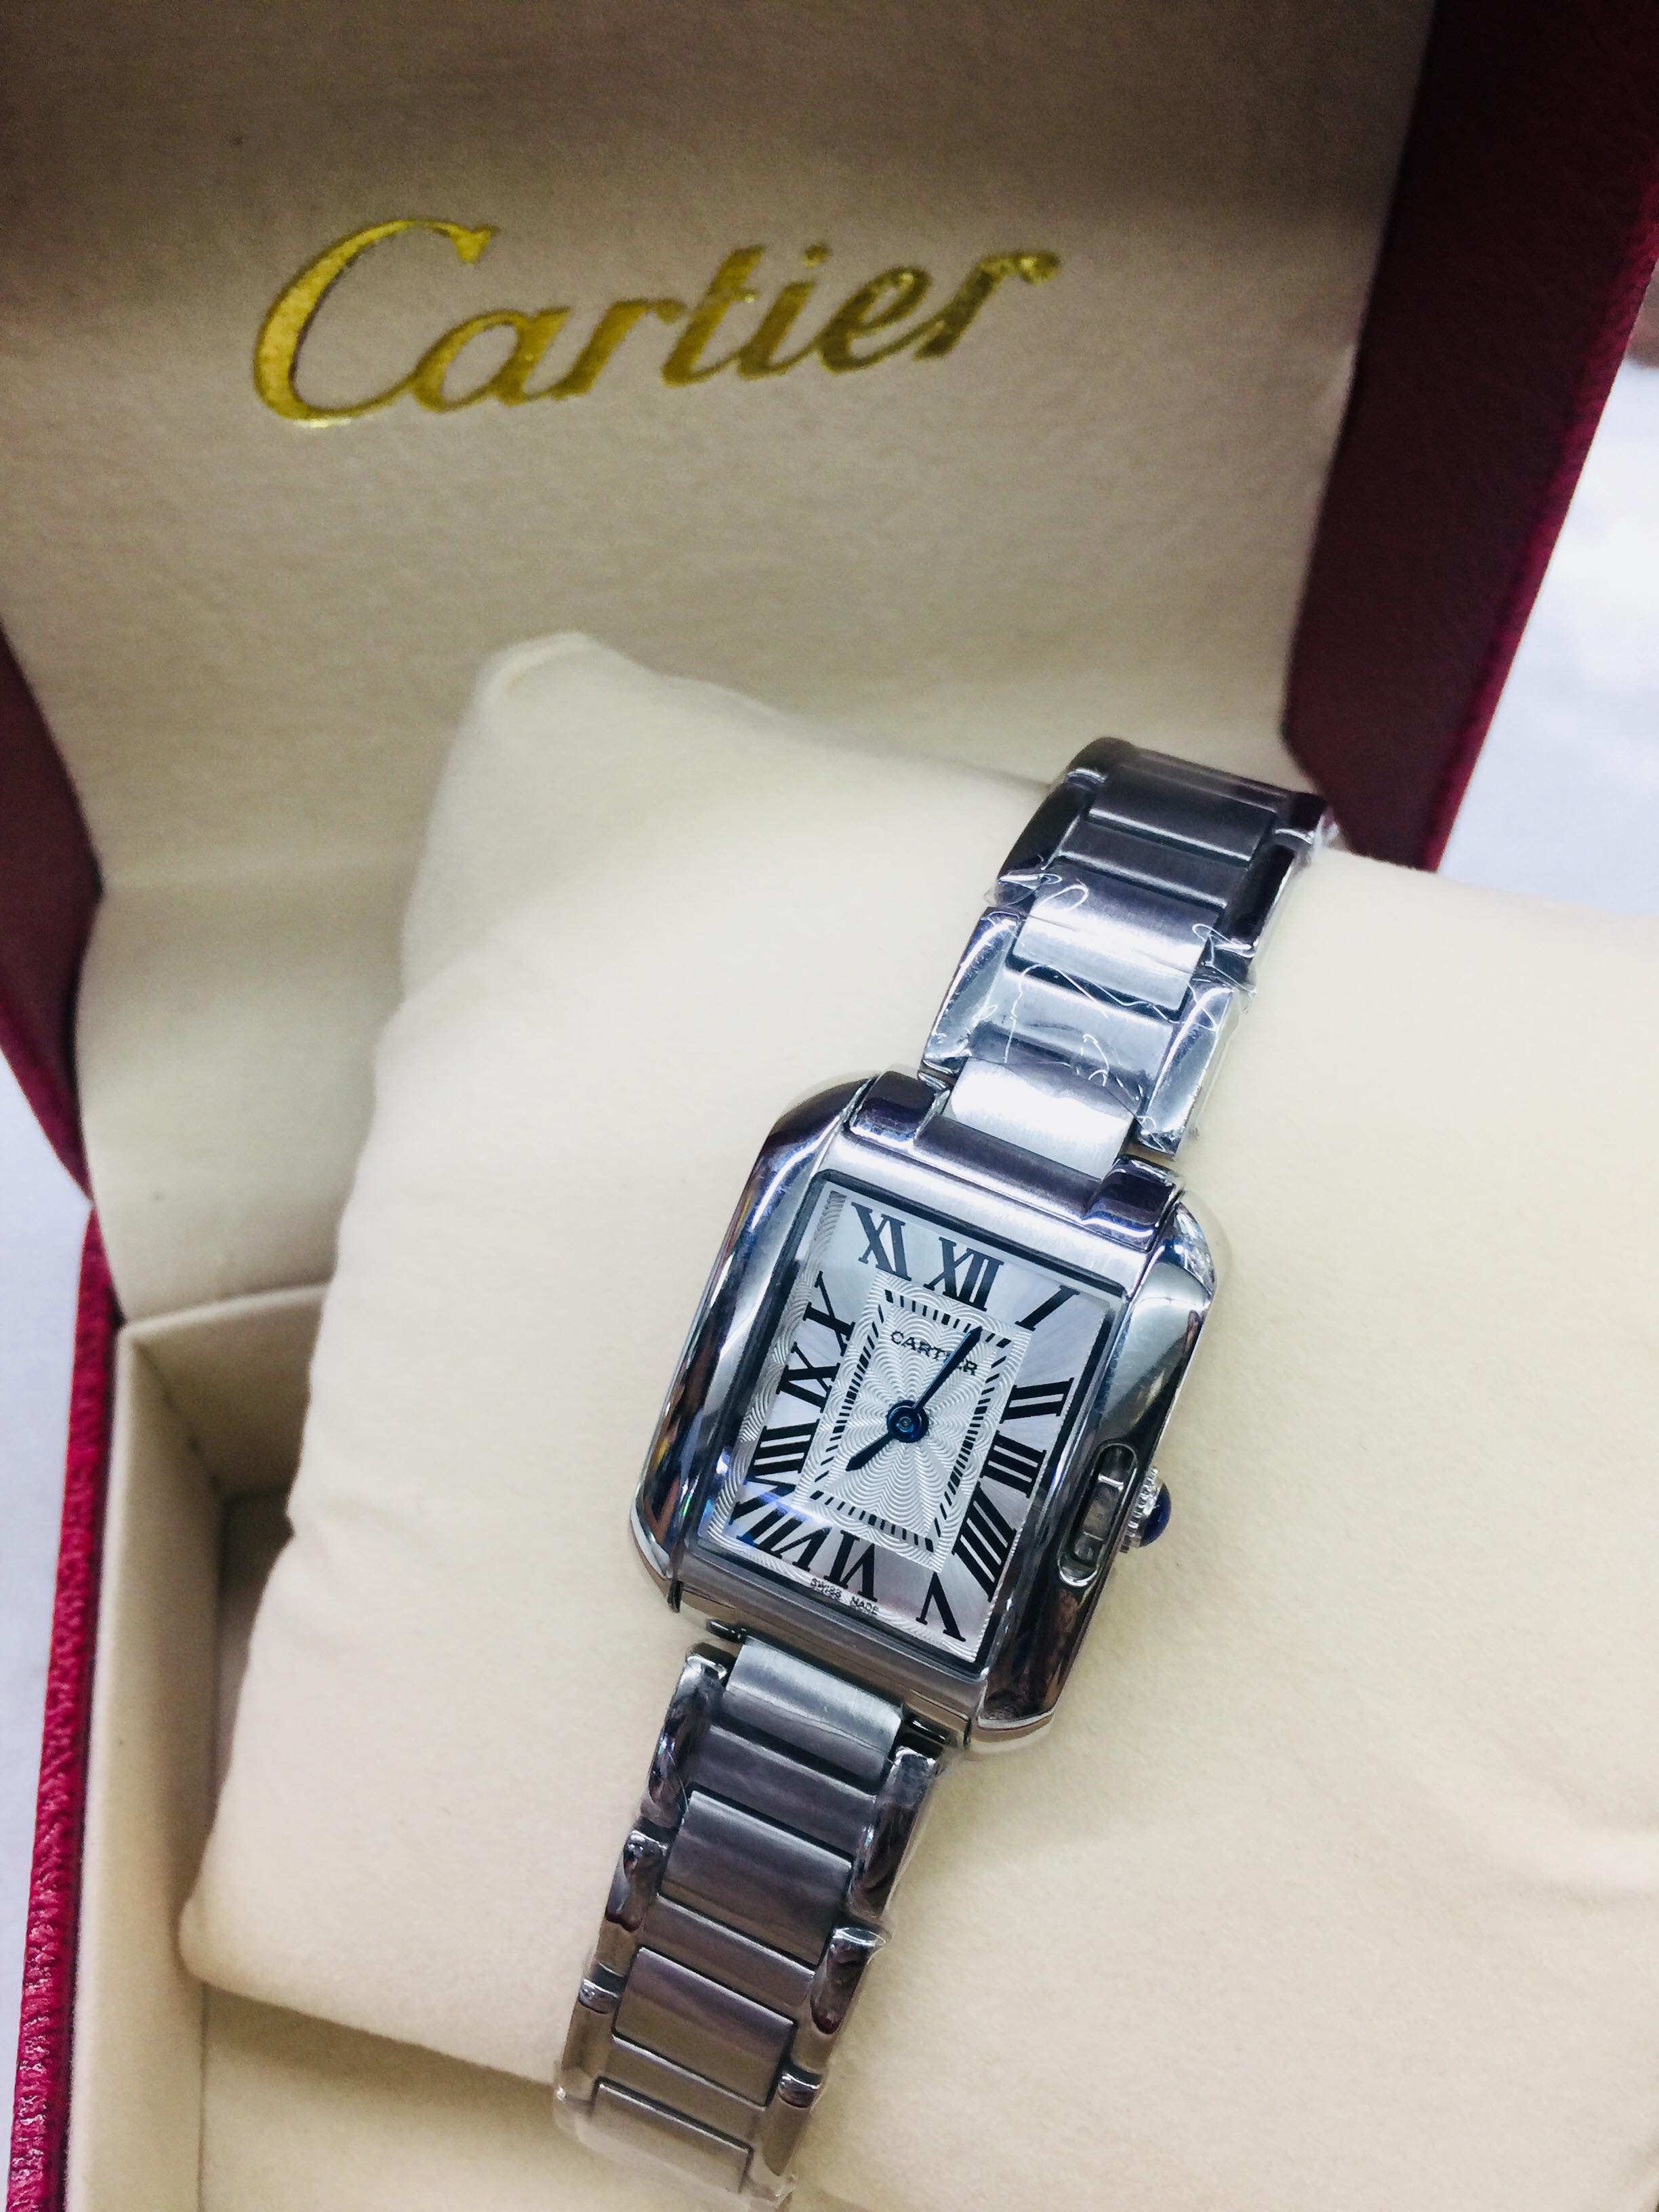 cartier watch and price